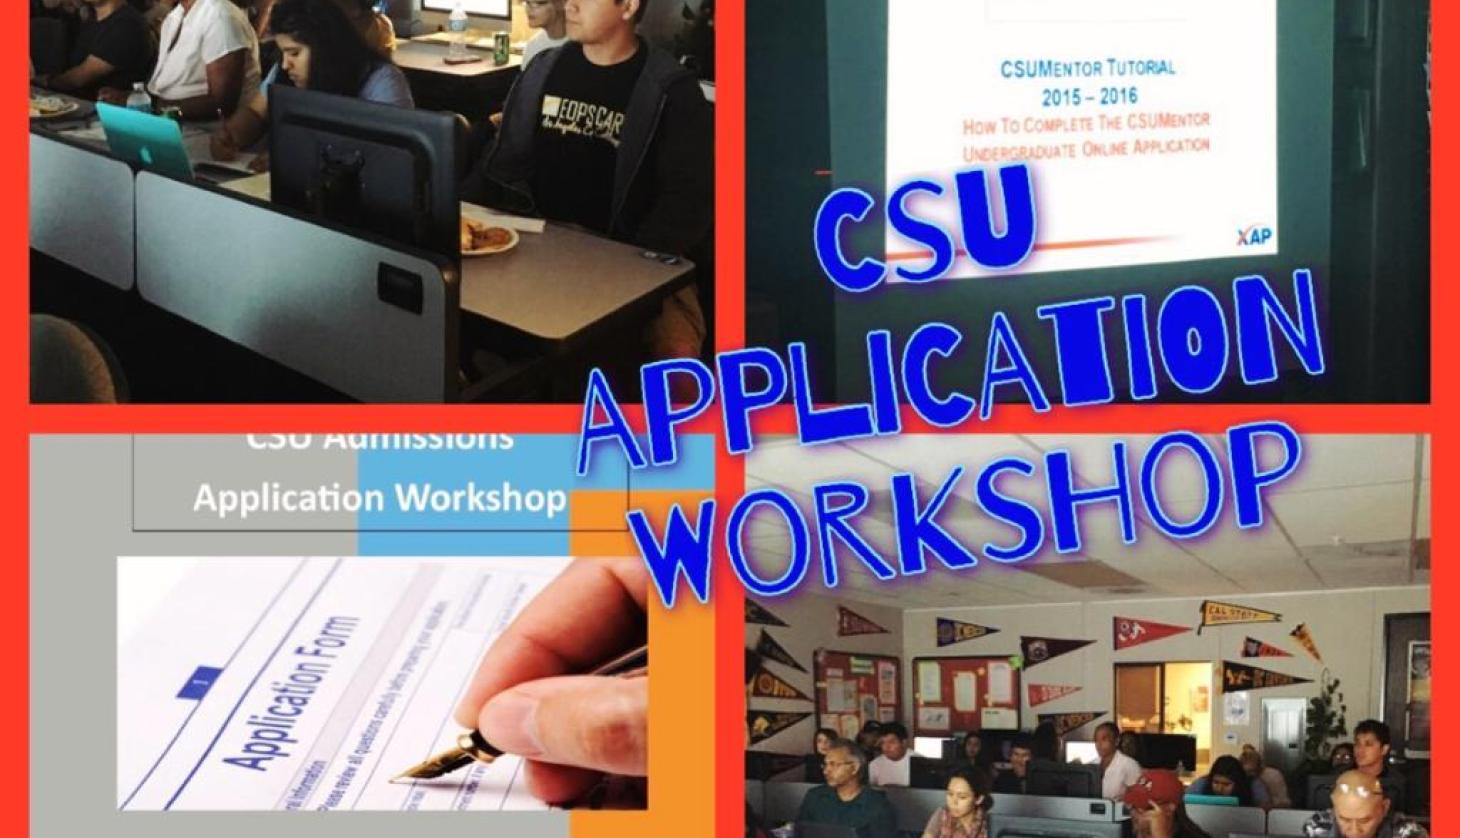 CSU Group of Students at a Meeting where CSU Application Workshop is Explained